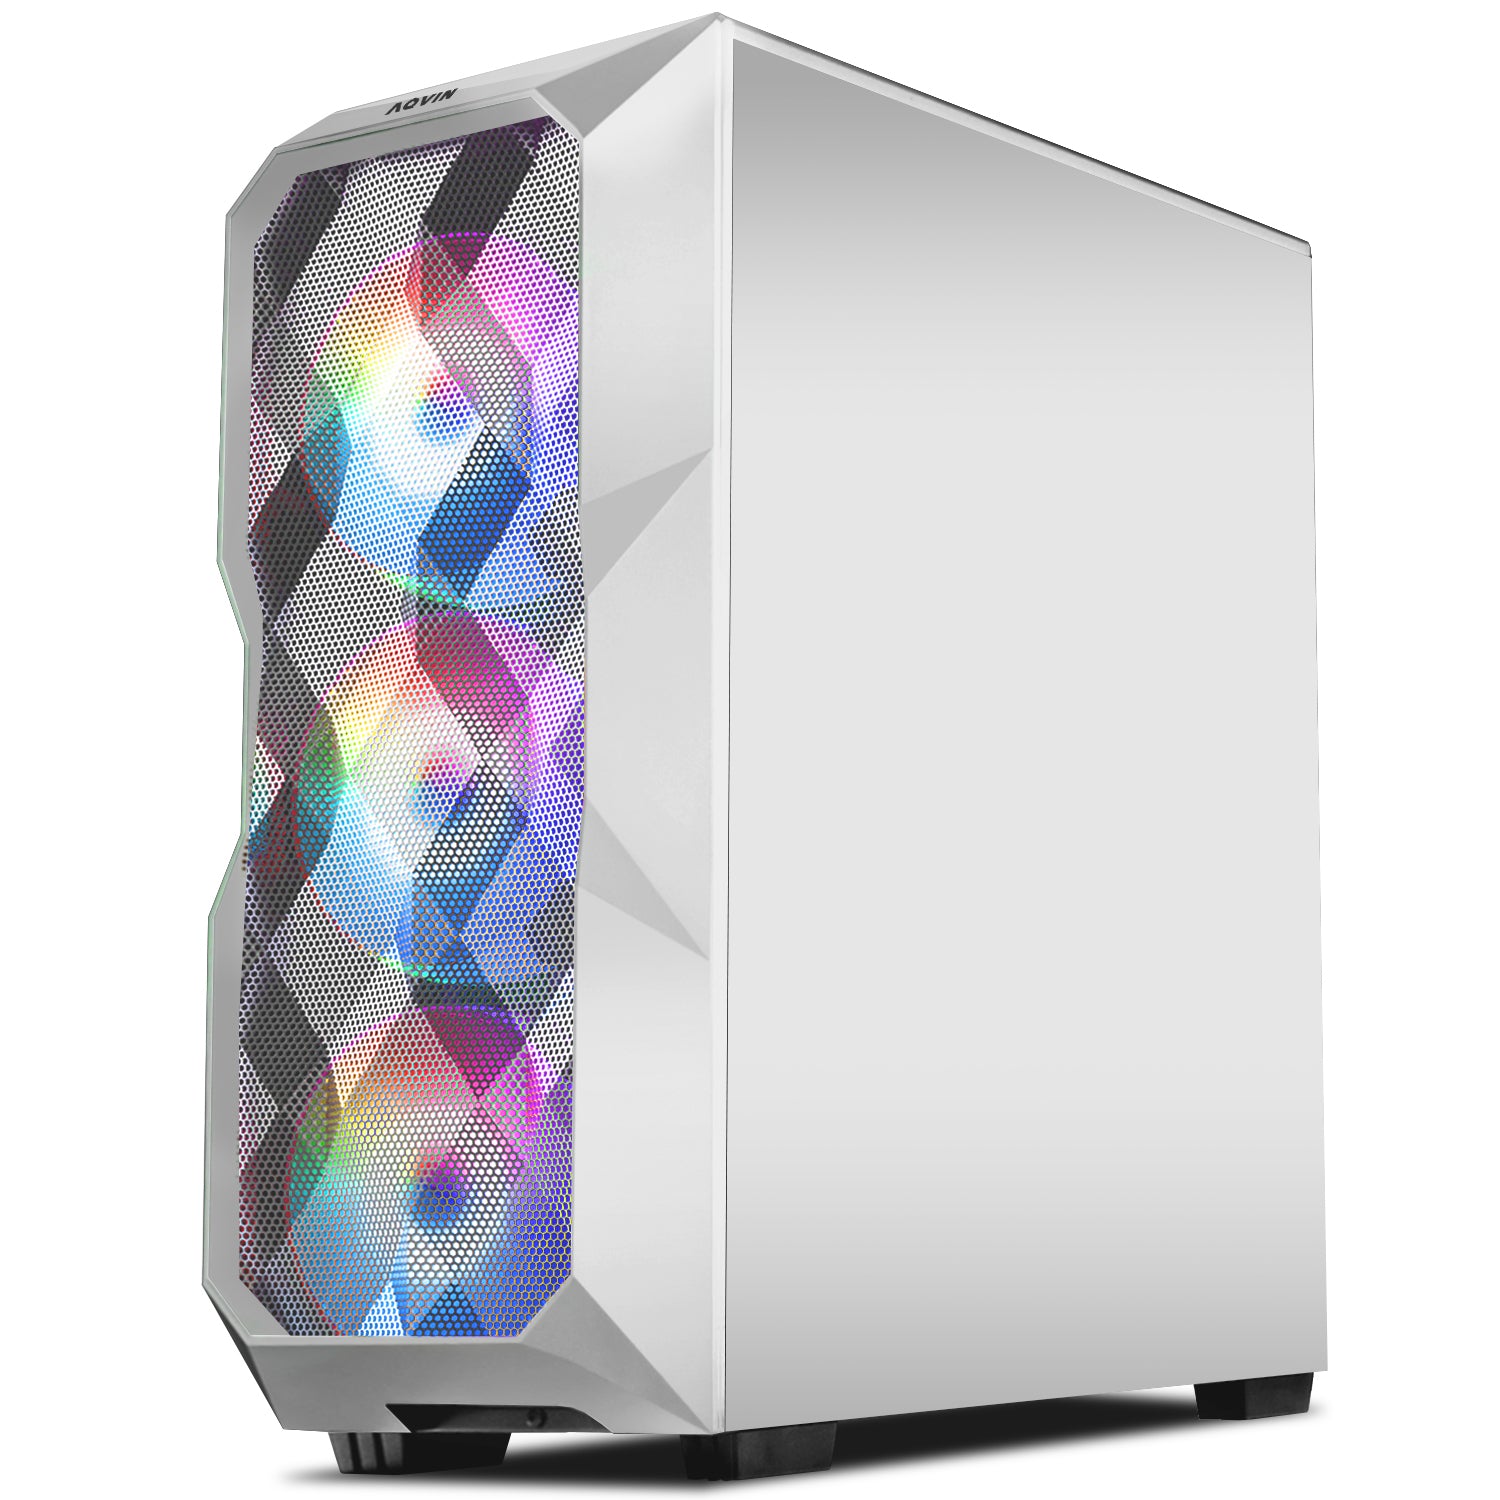 AQVIN AQW70 Gaming Desktop Computer Combo Tower | RGB Fan Lights | Core i7 CPU up to 4.00 GHz | 32GB DDR4 RAM | 1TB - 2TB SSD | RX 580, GTX 1050Ti, 1630, 1650, 1660s | Windows 10 Pro | Gaming Keyboard and Mouse